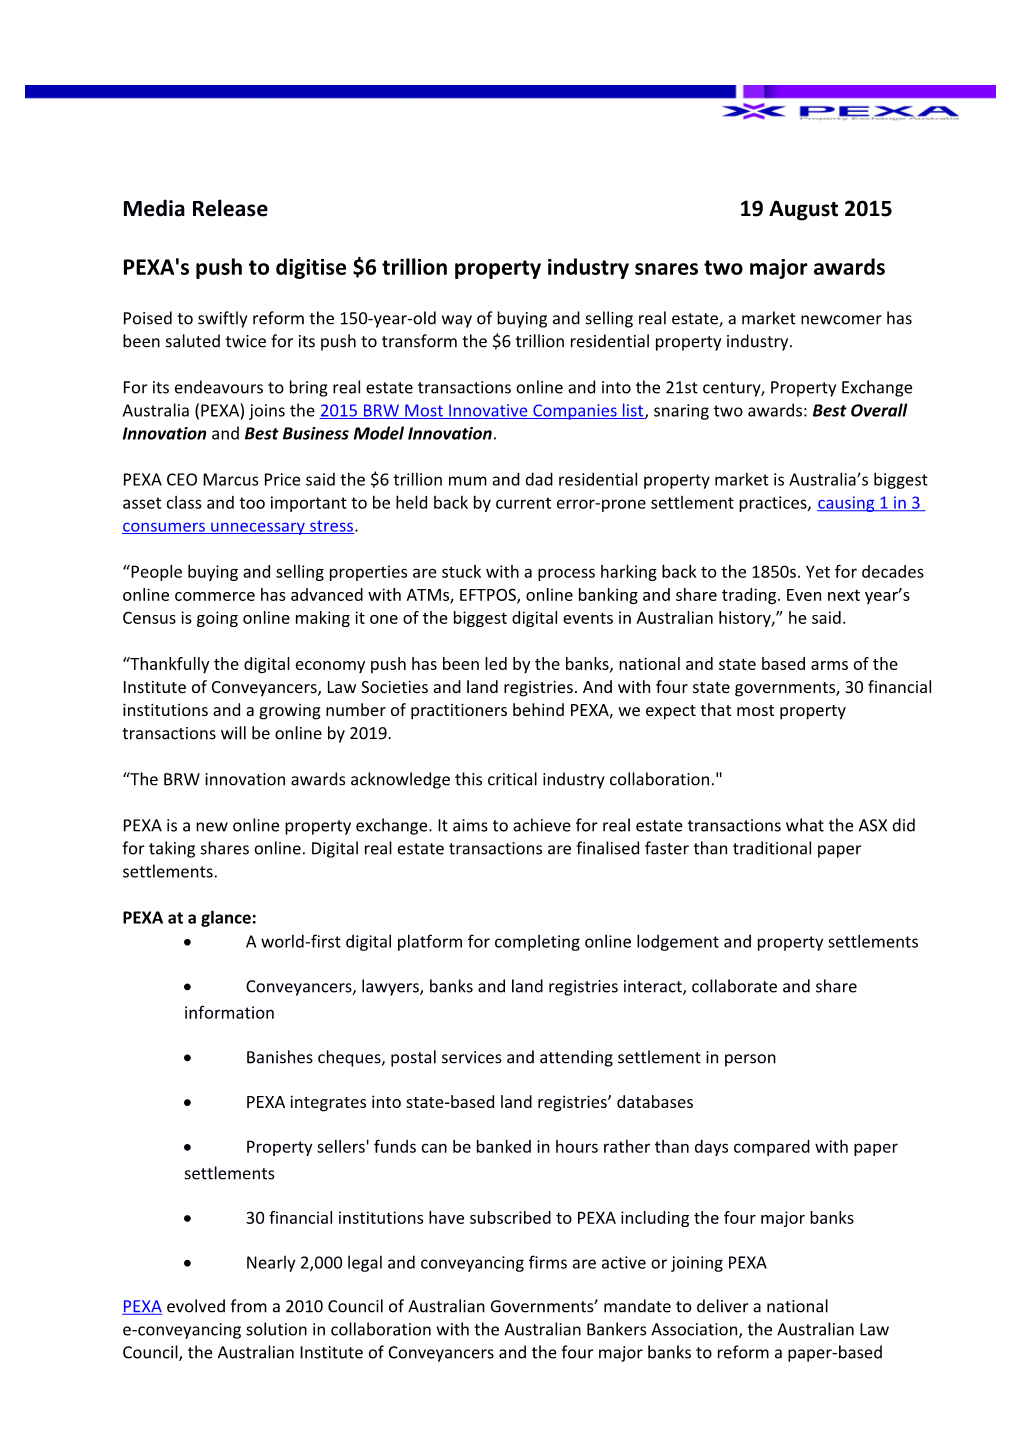 PEXA's Push to Digitise $6 Trillion Property Industry Snares Two Major Awards